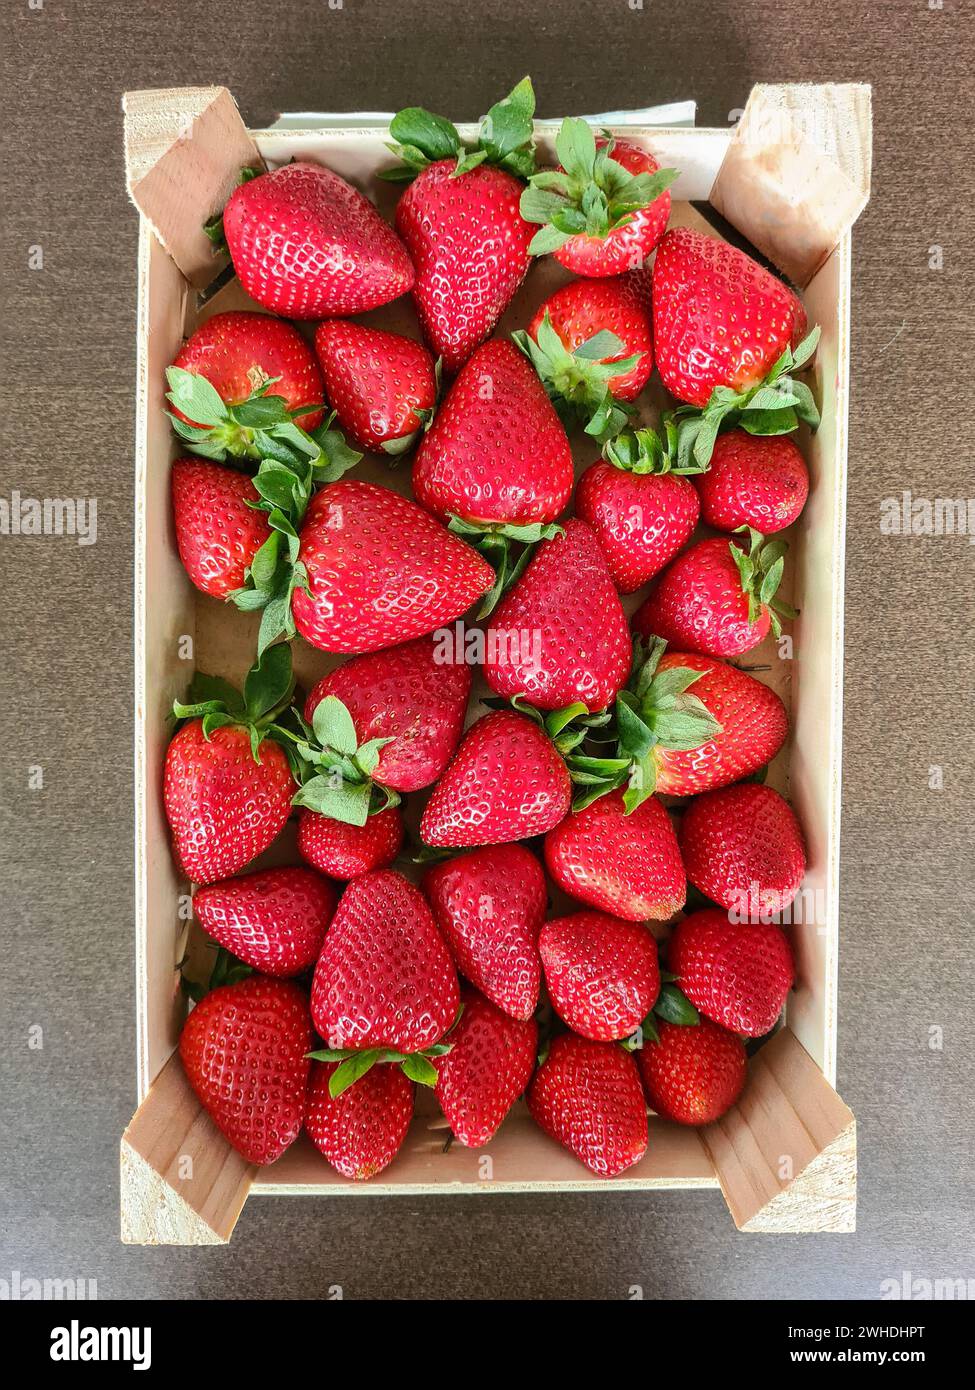 Whole fresh ripe red strawberries in a box Stock Photo